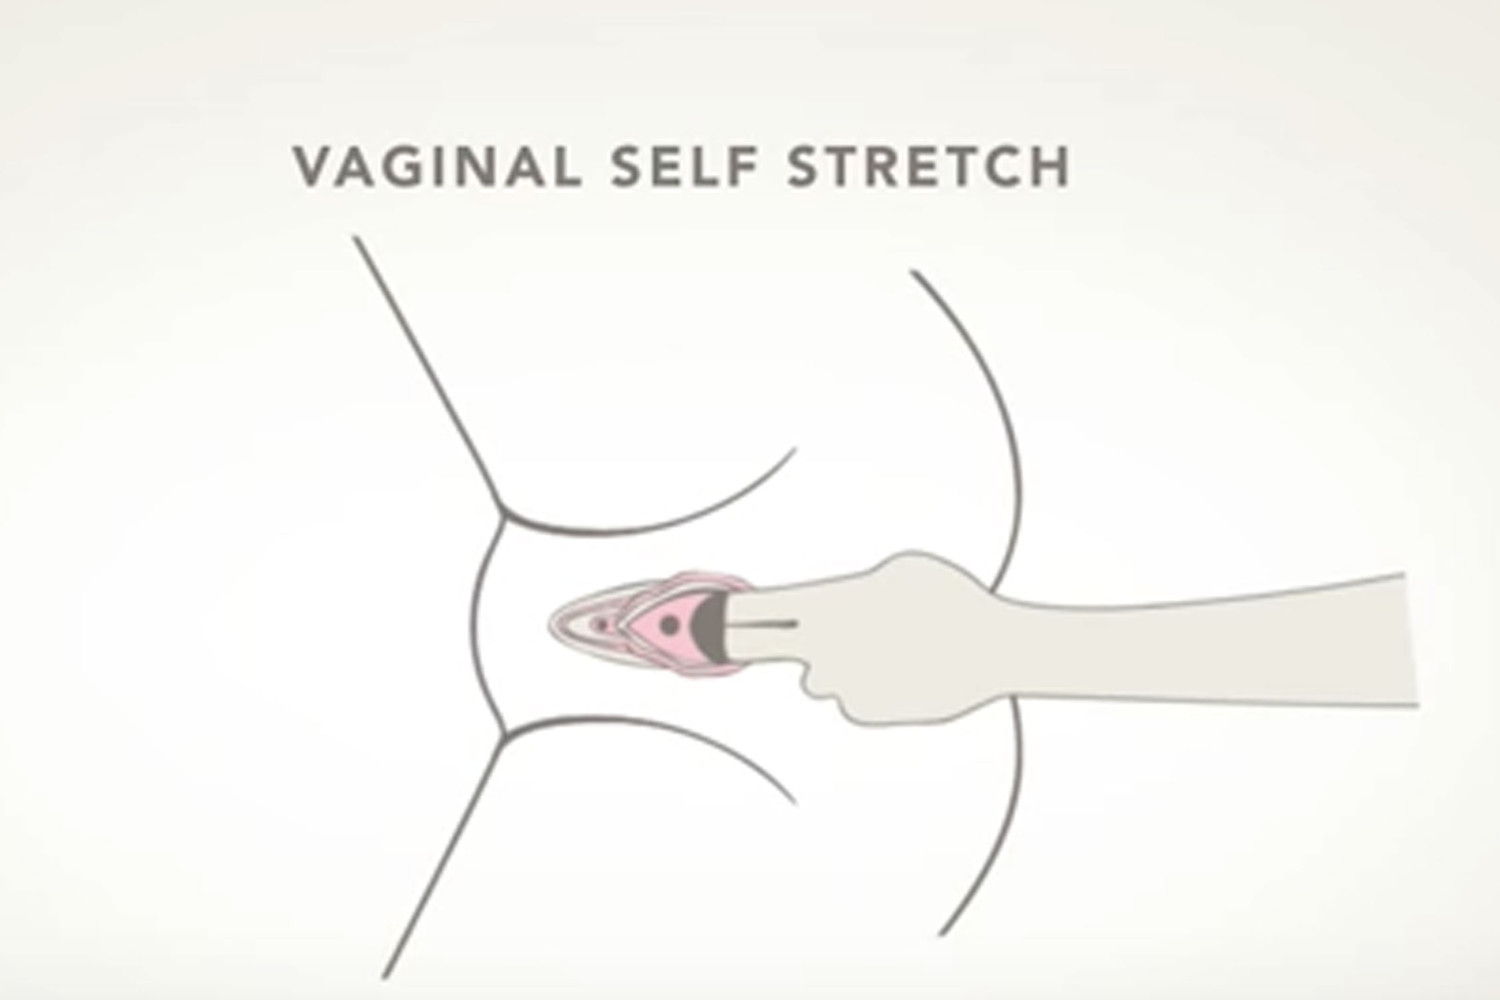 Video Teaches Women How To Prepare For Childbirth With Vaginal Self Stretching